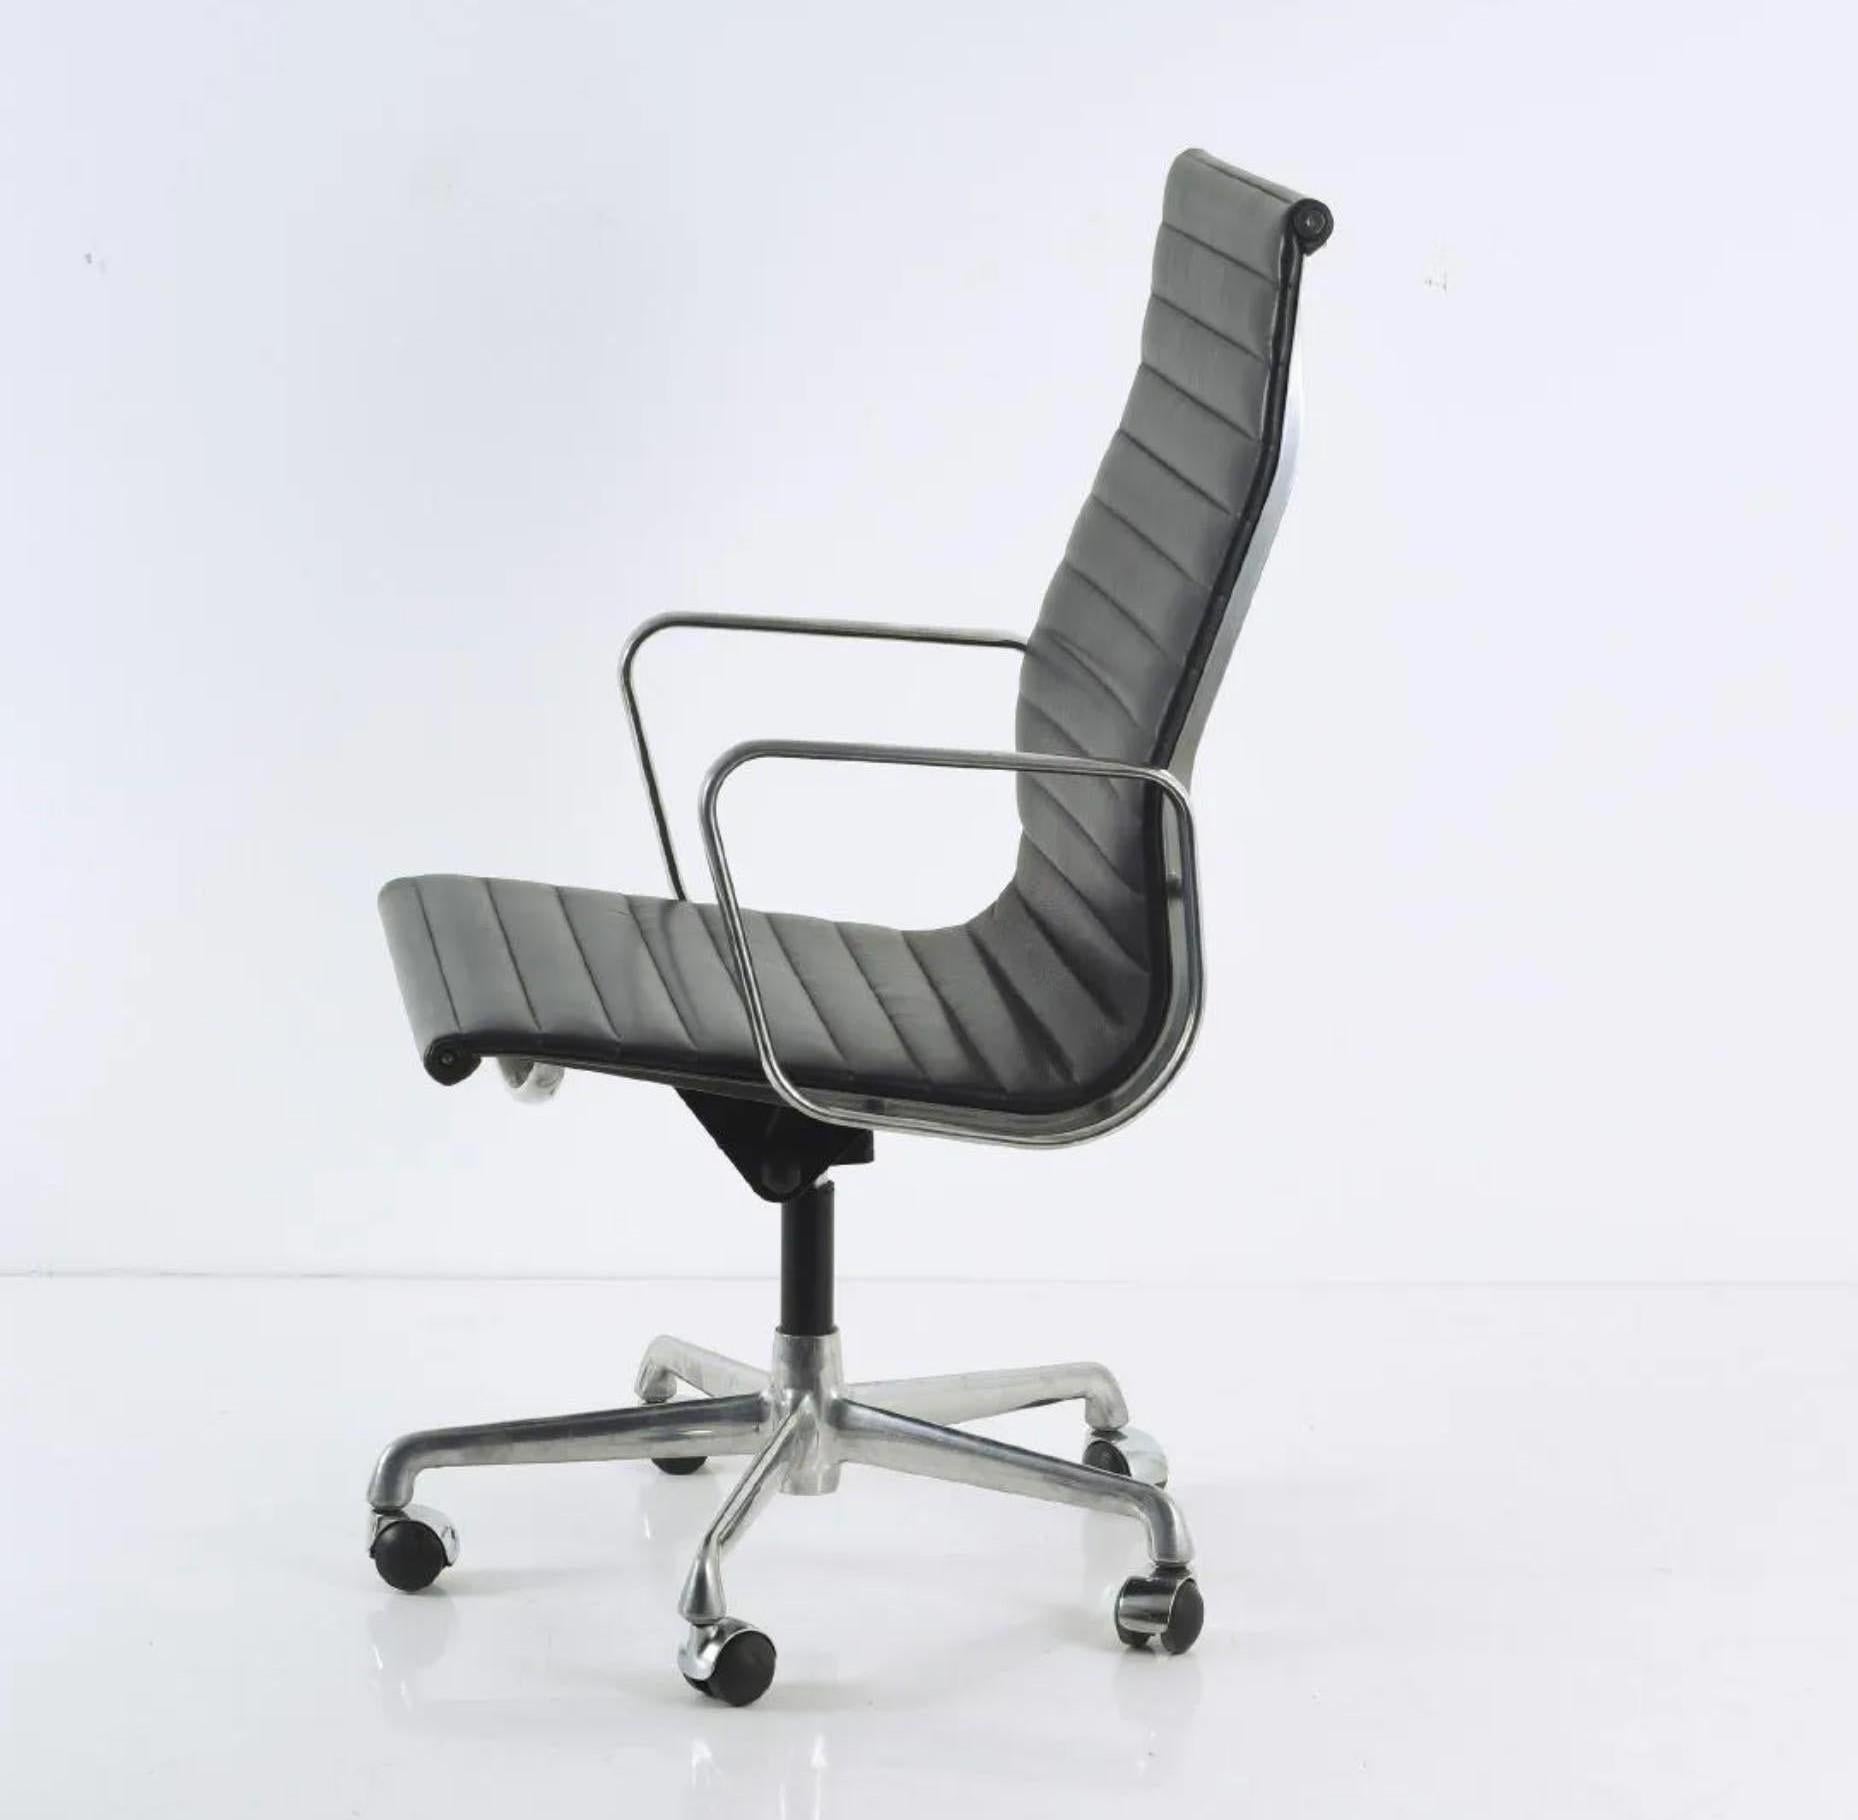 The executive chair features a high back with arms and an aluminum frame with suspended upholstery. It has 5-star base with casters, tilt-swivel mechanism and seat-height adjustment. The new pneumatic height adjustment allows for easier height